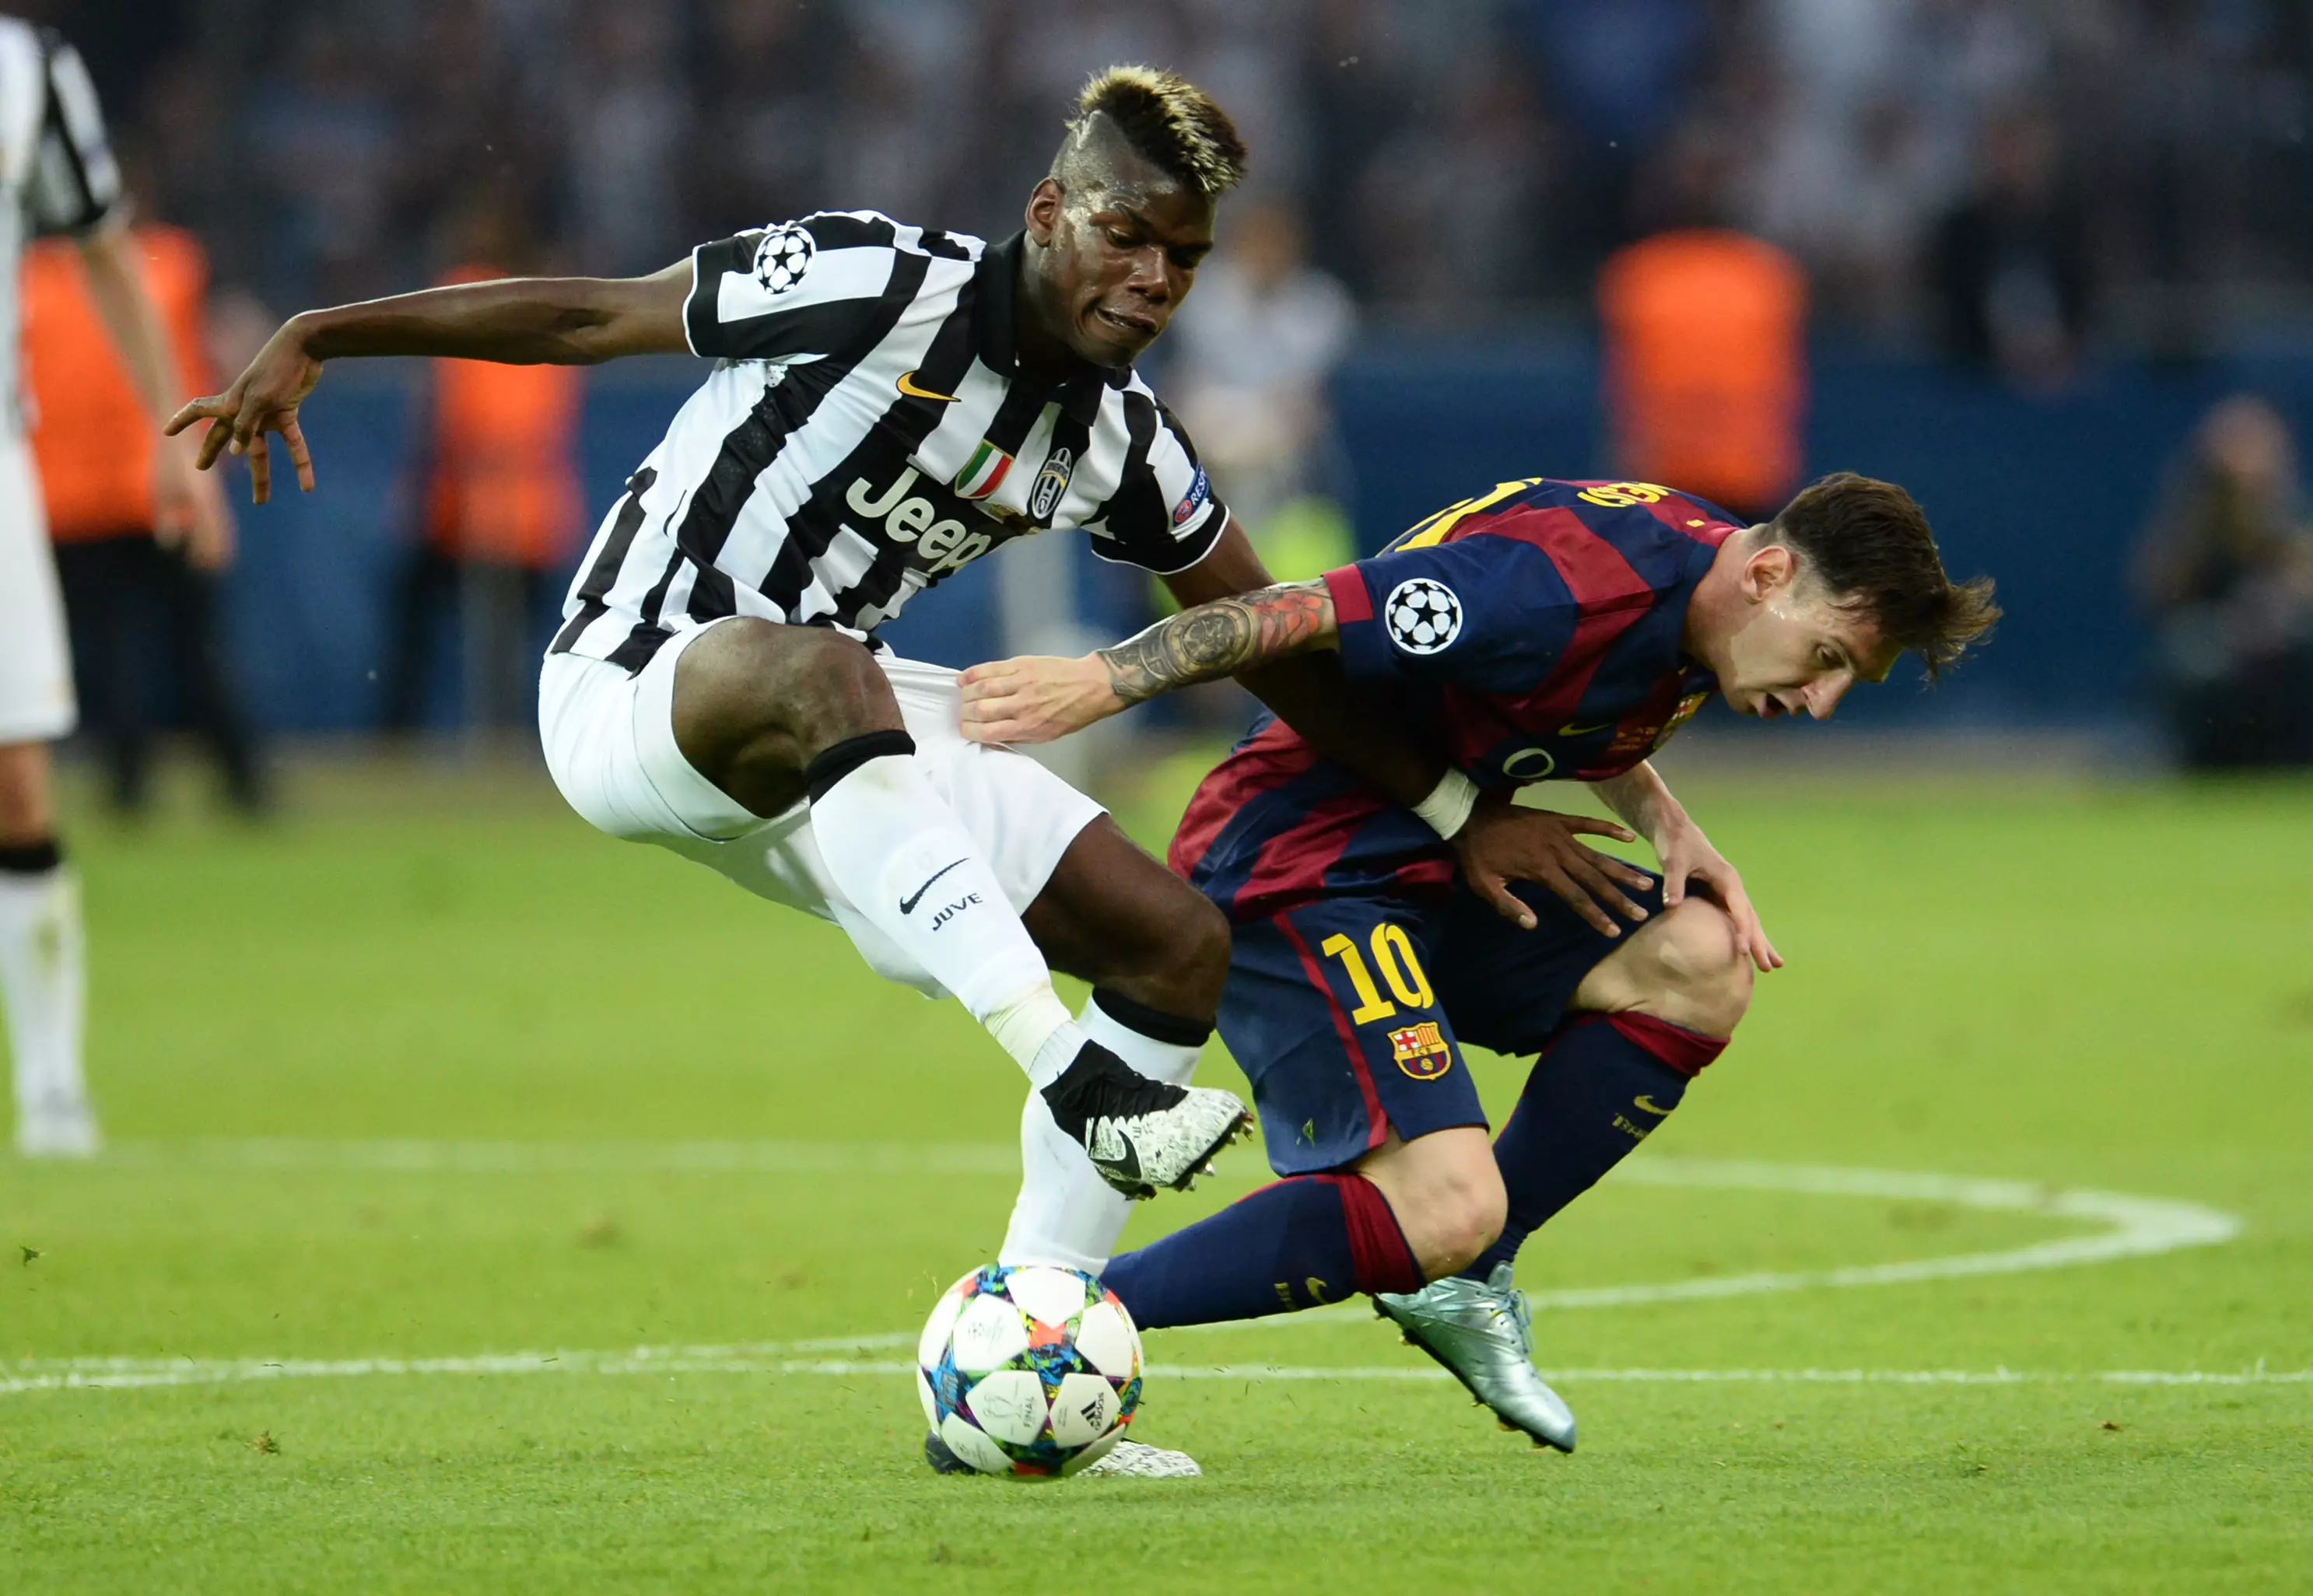 Pogba has come up against Messi in the final before. Image: PA Images